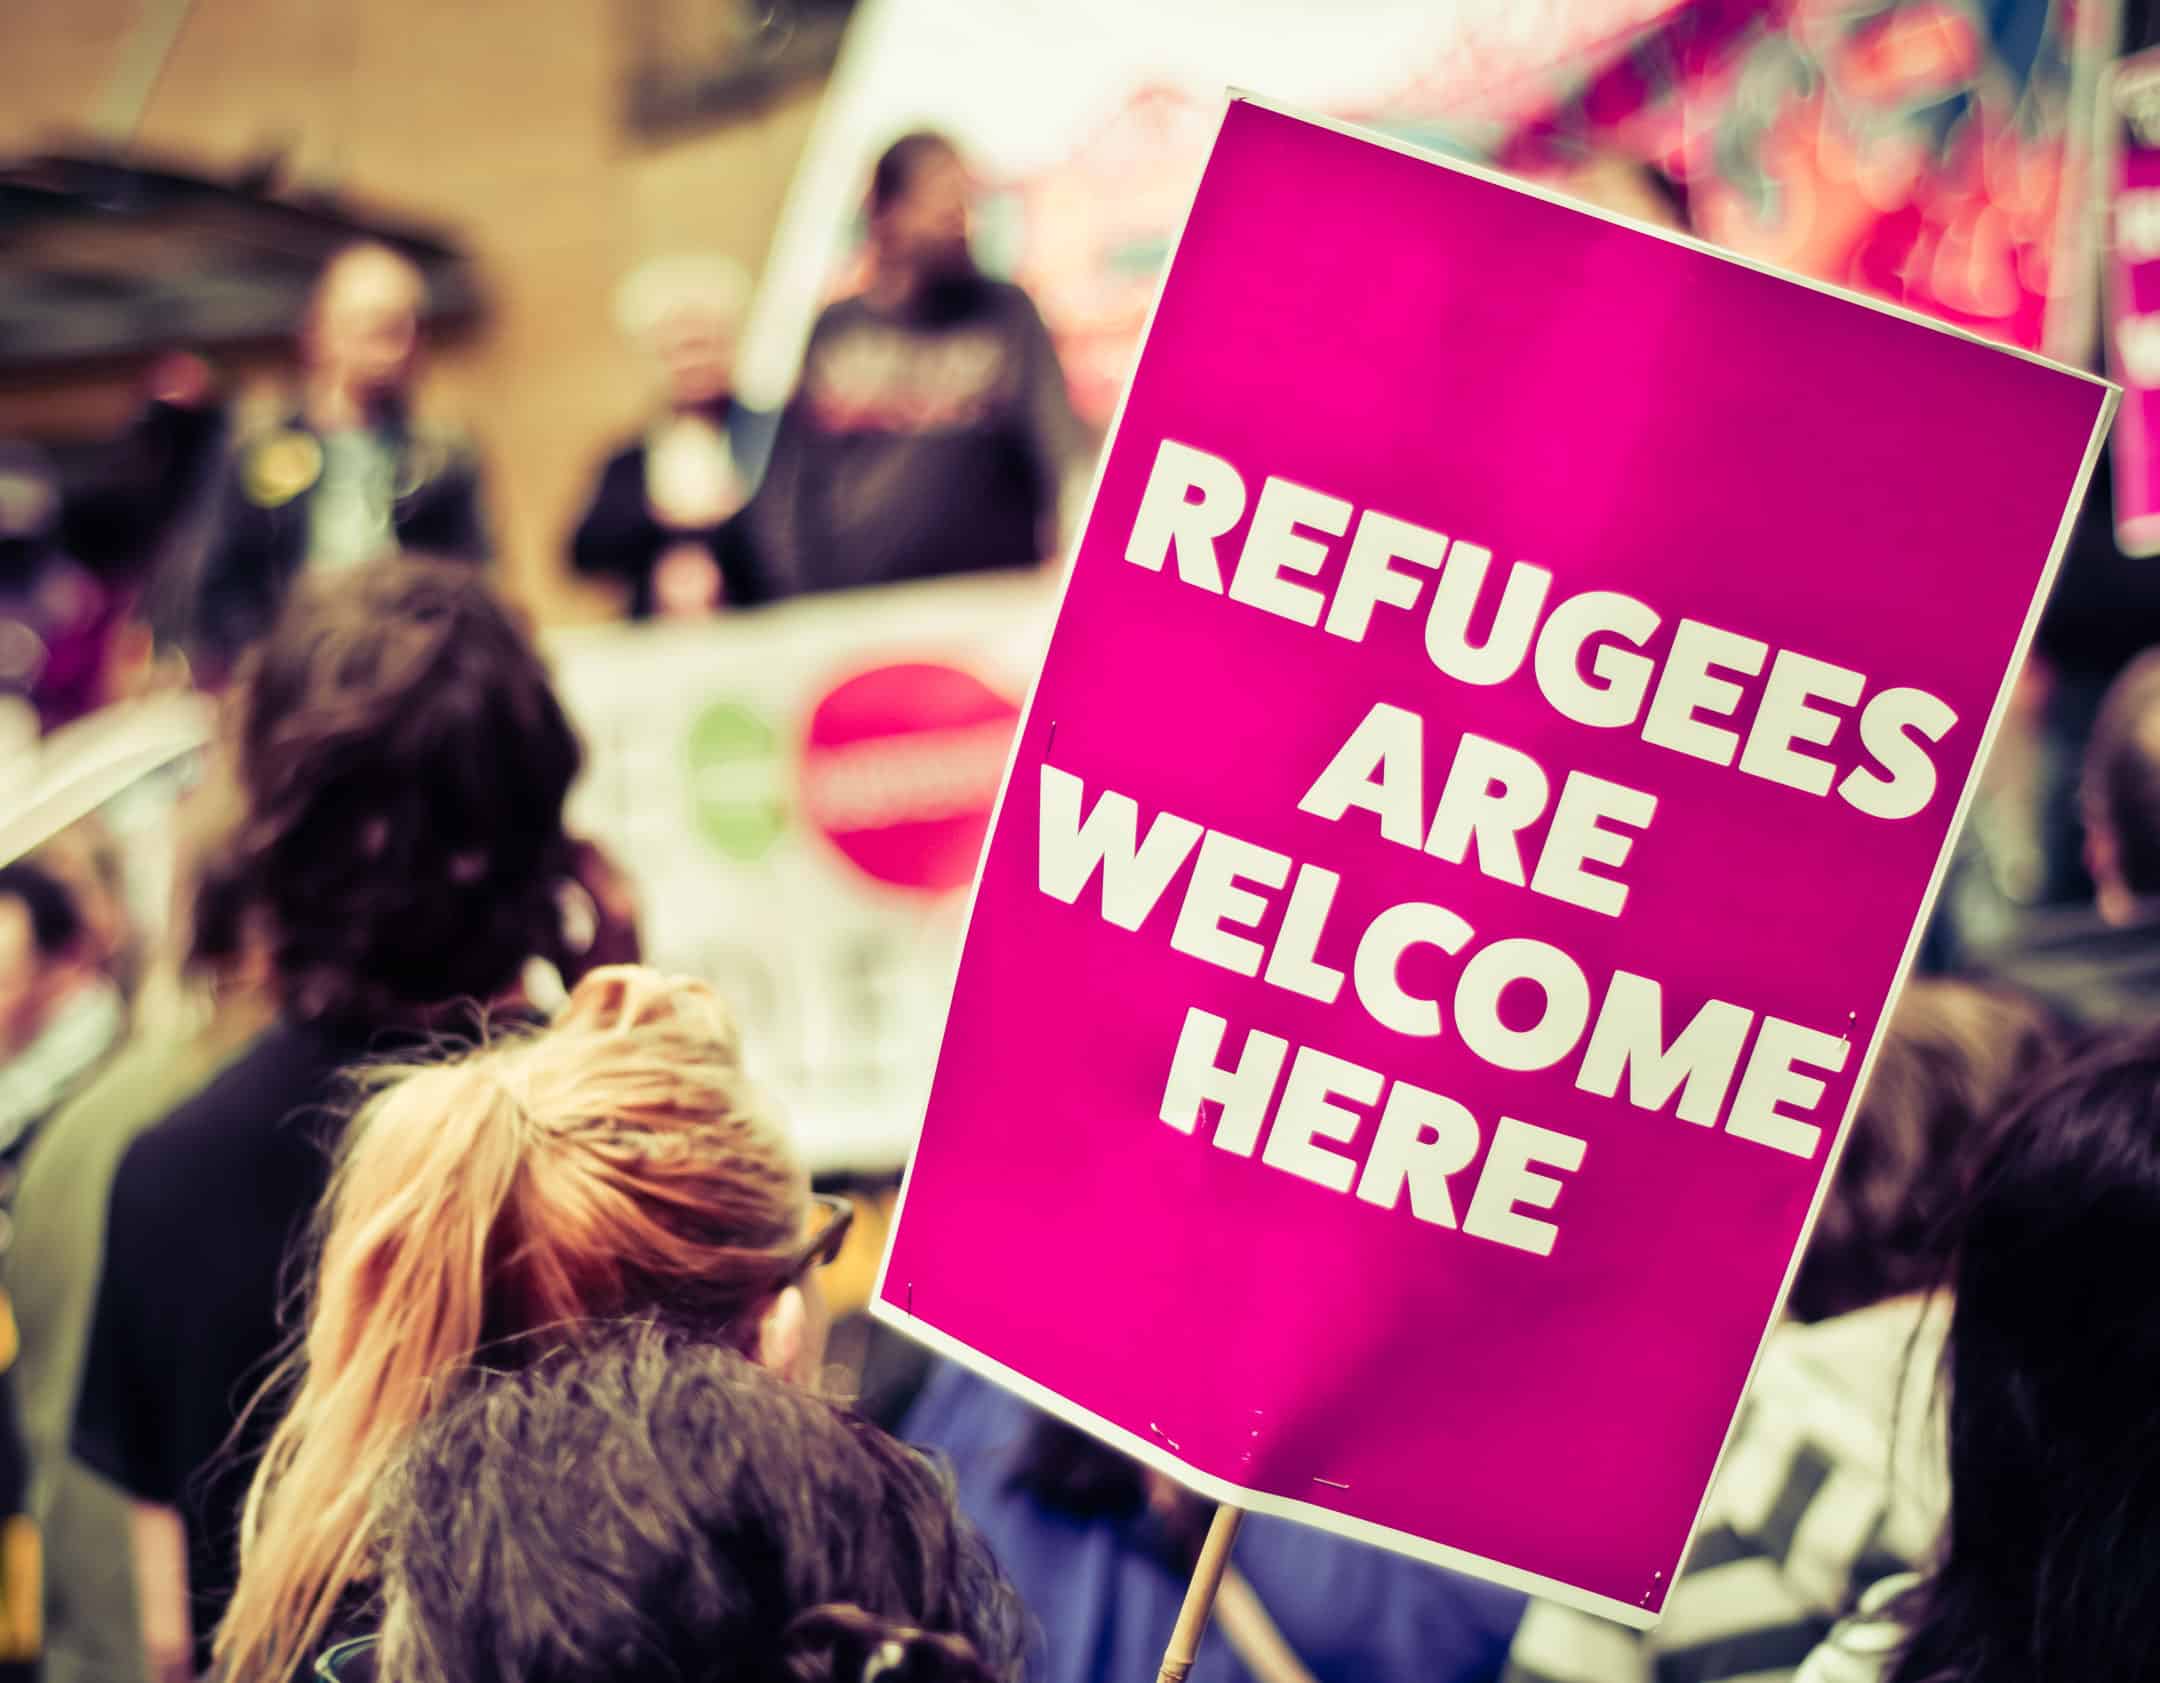 During a protest, a sign of "refugees are welcome here' is shown